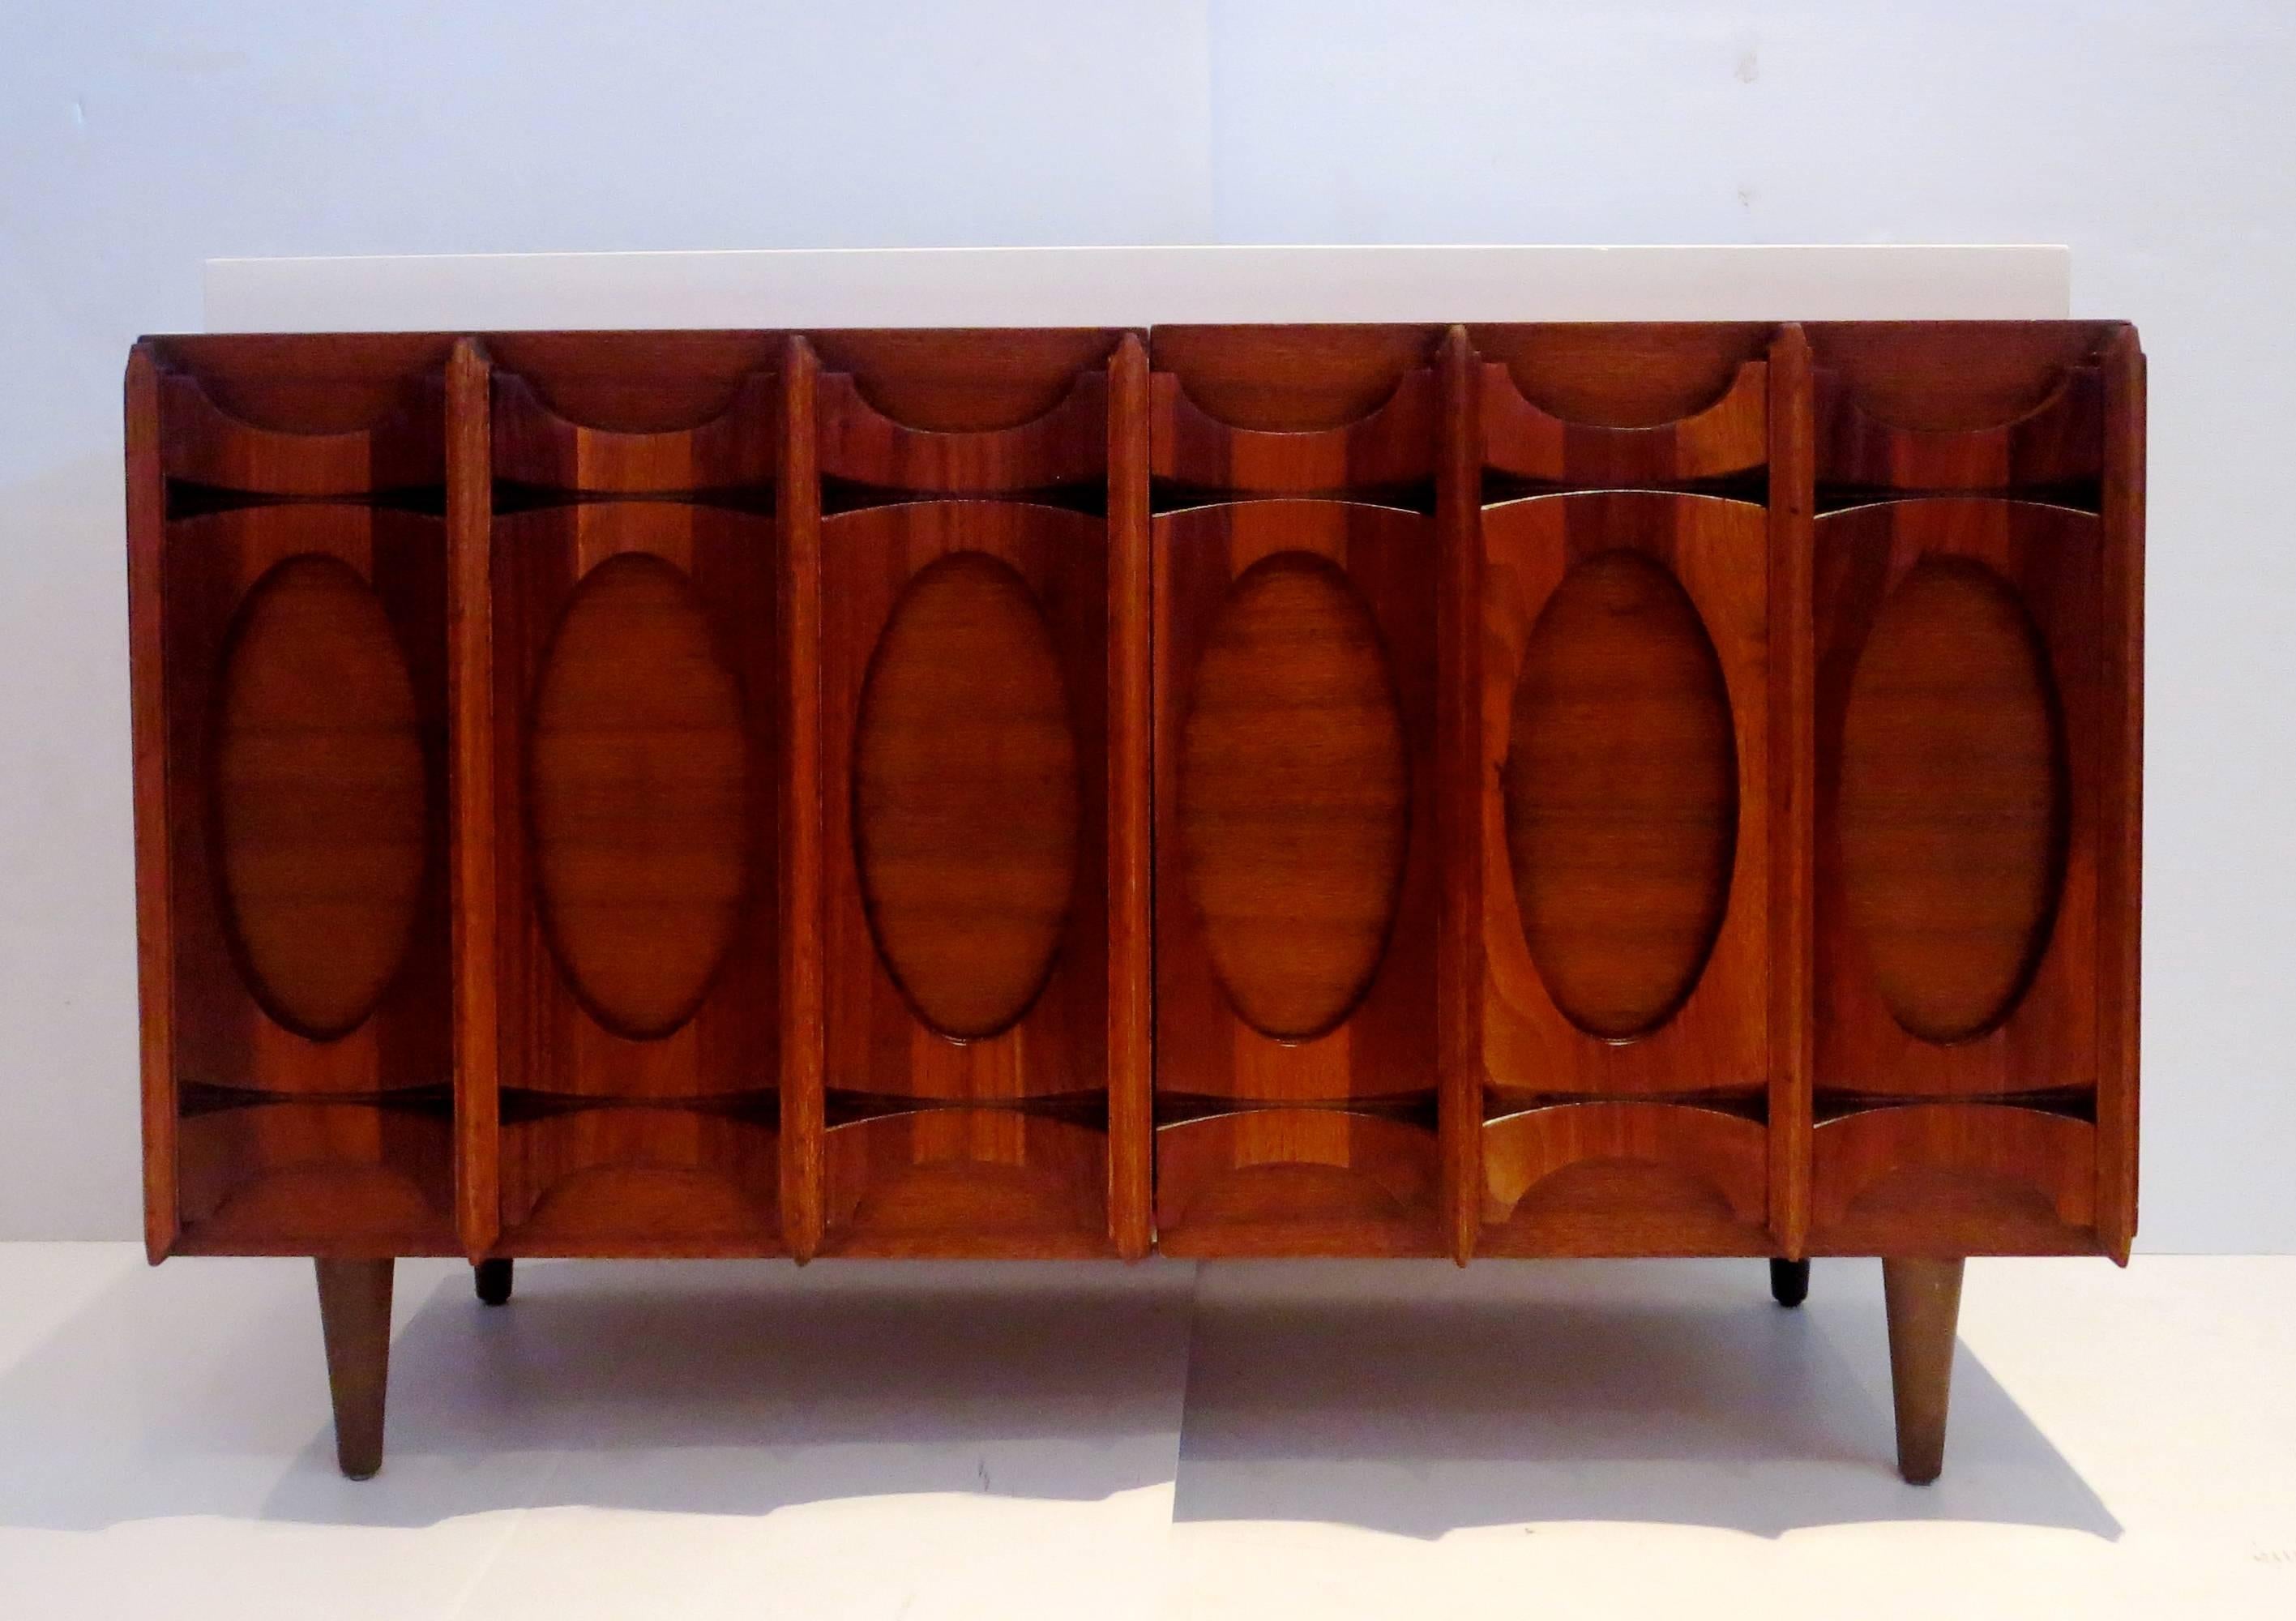 Mid-Century Modern 1950s American Modern Cabinet with Sculpted Walnut Facade and White Lacquer